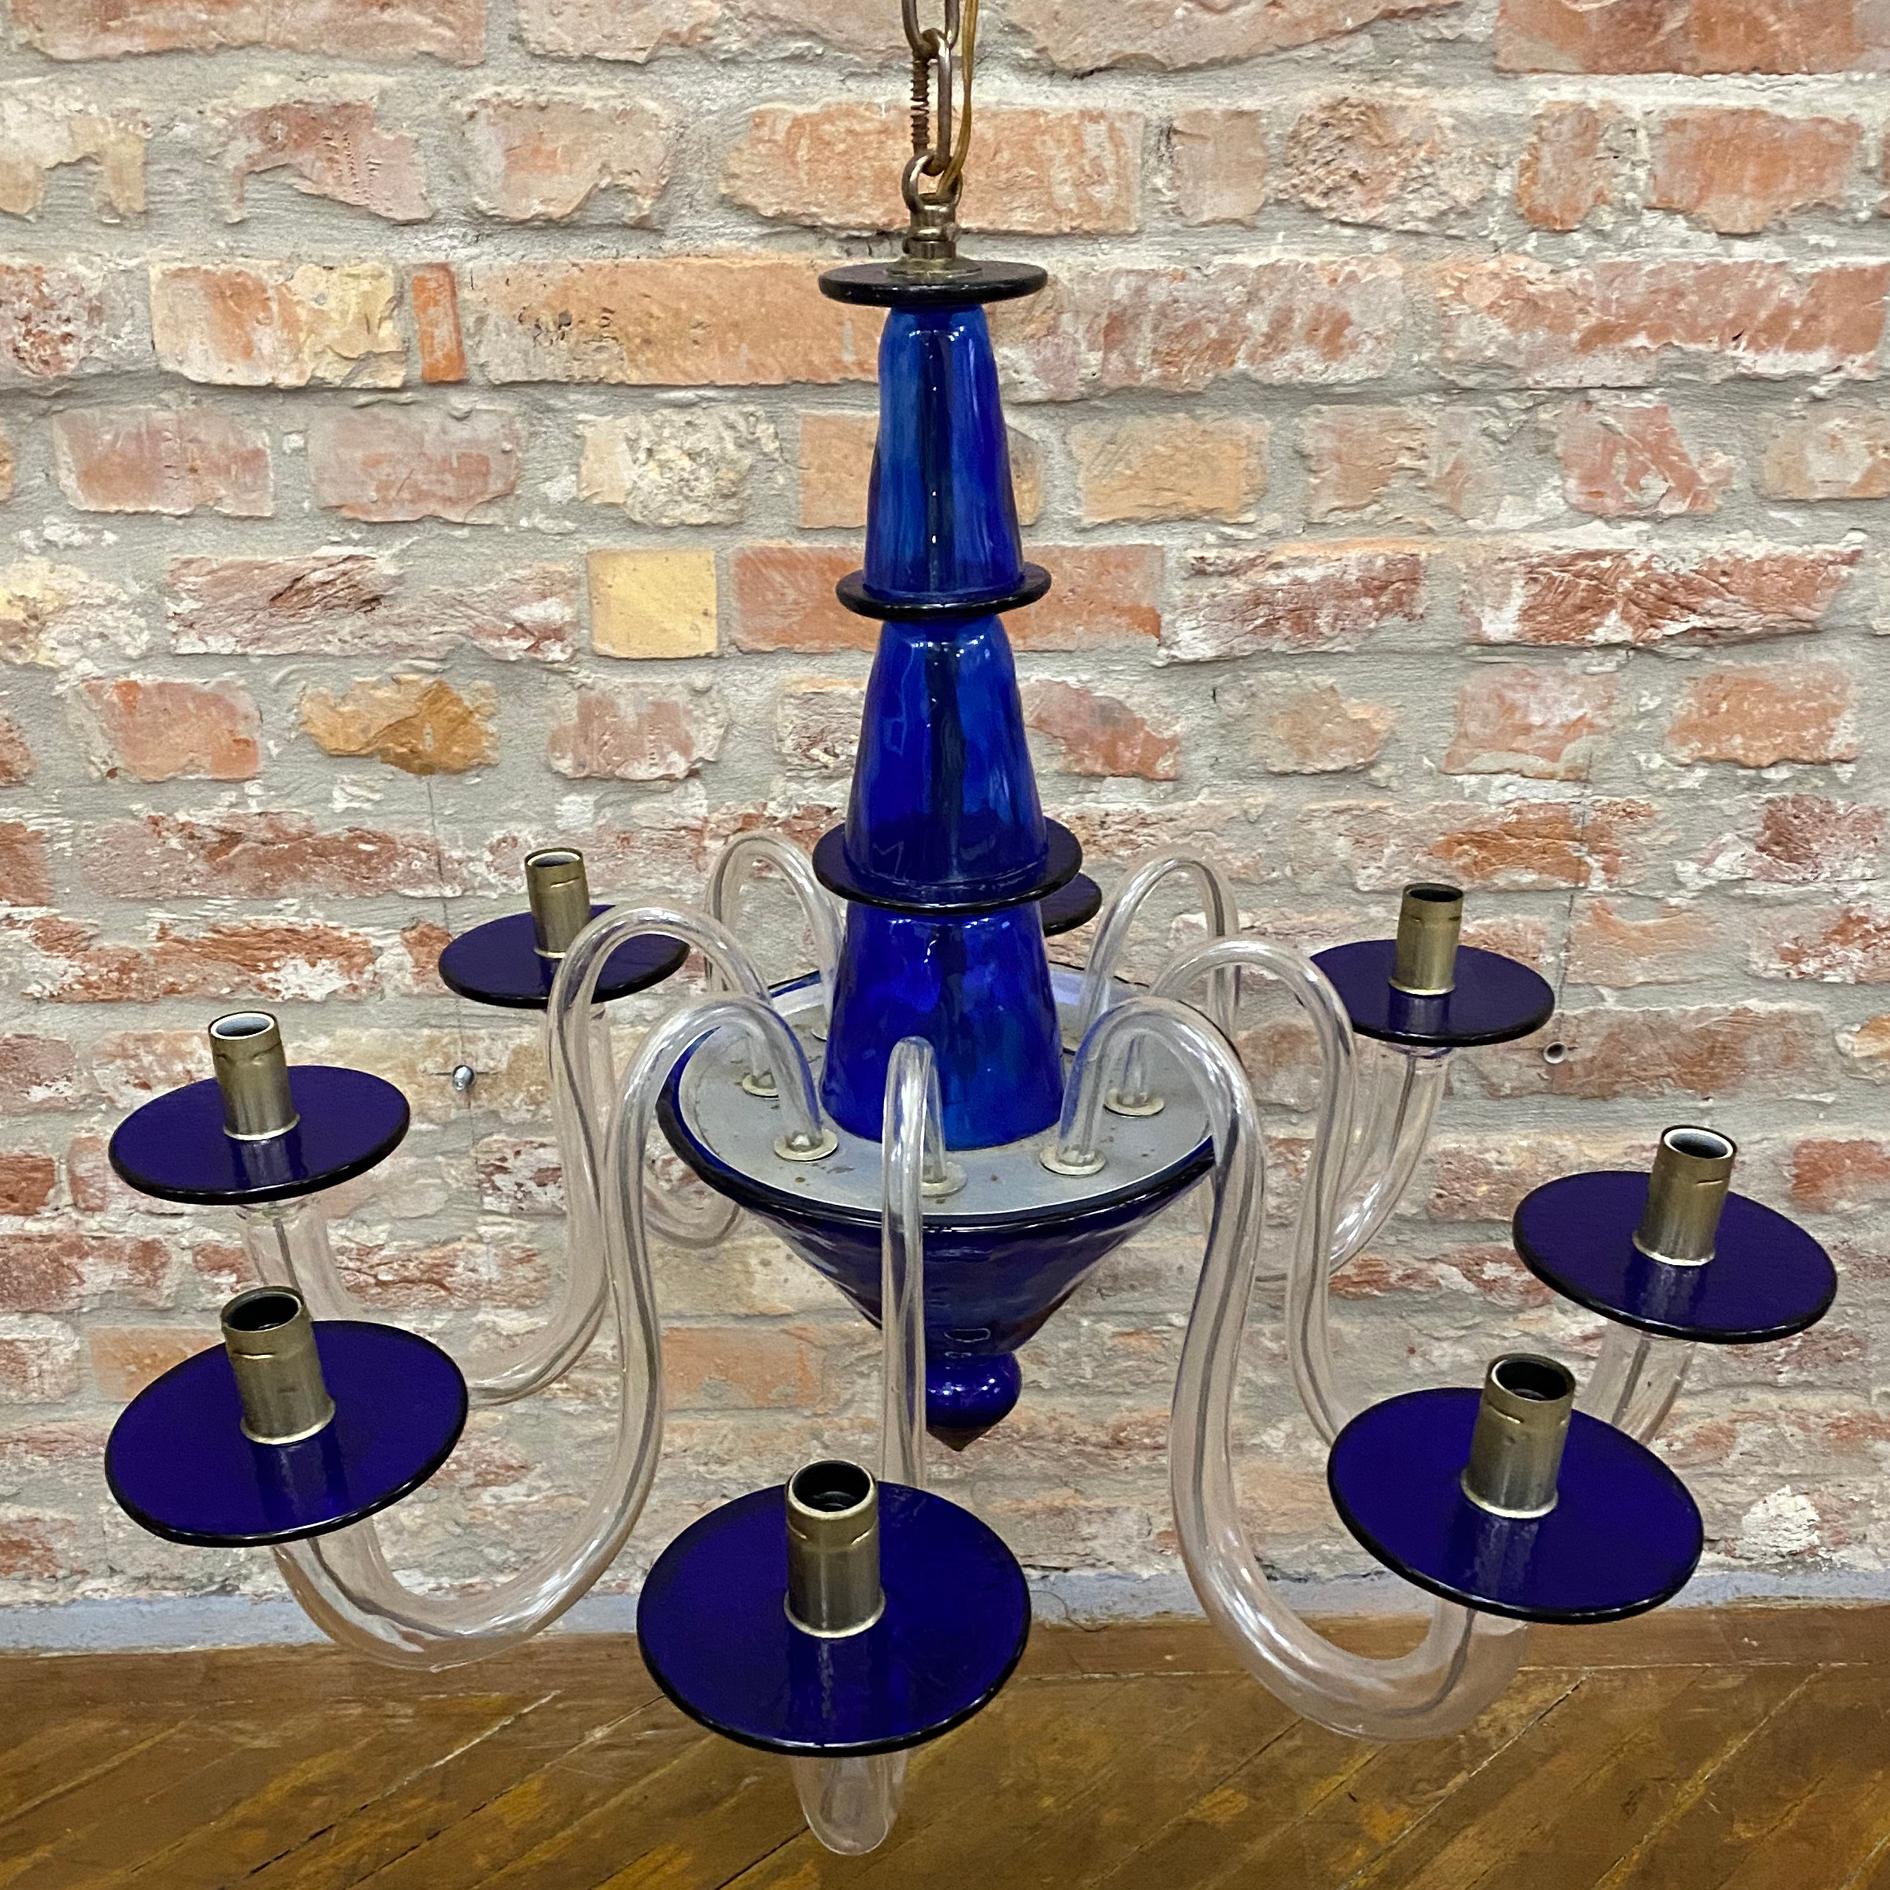 Elegant eight-arm handcrafted, hand blown La Murrina chandelier in dark cobalt blue Murano glass,
La Murrina manufacturers mark on the chandelier body.
Art Deco style and executed in 1980s.
Eight s shaped arms in clear glass.
E 14 European light